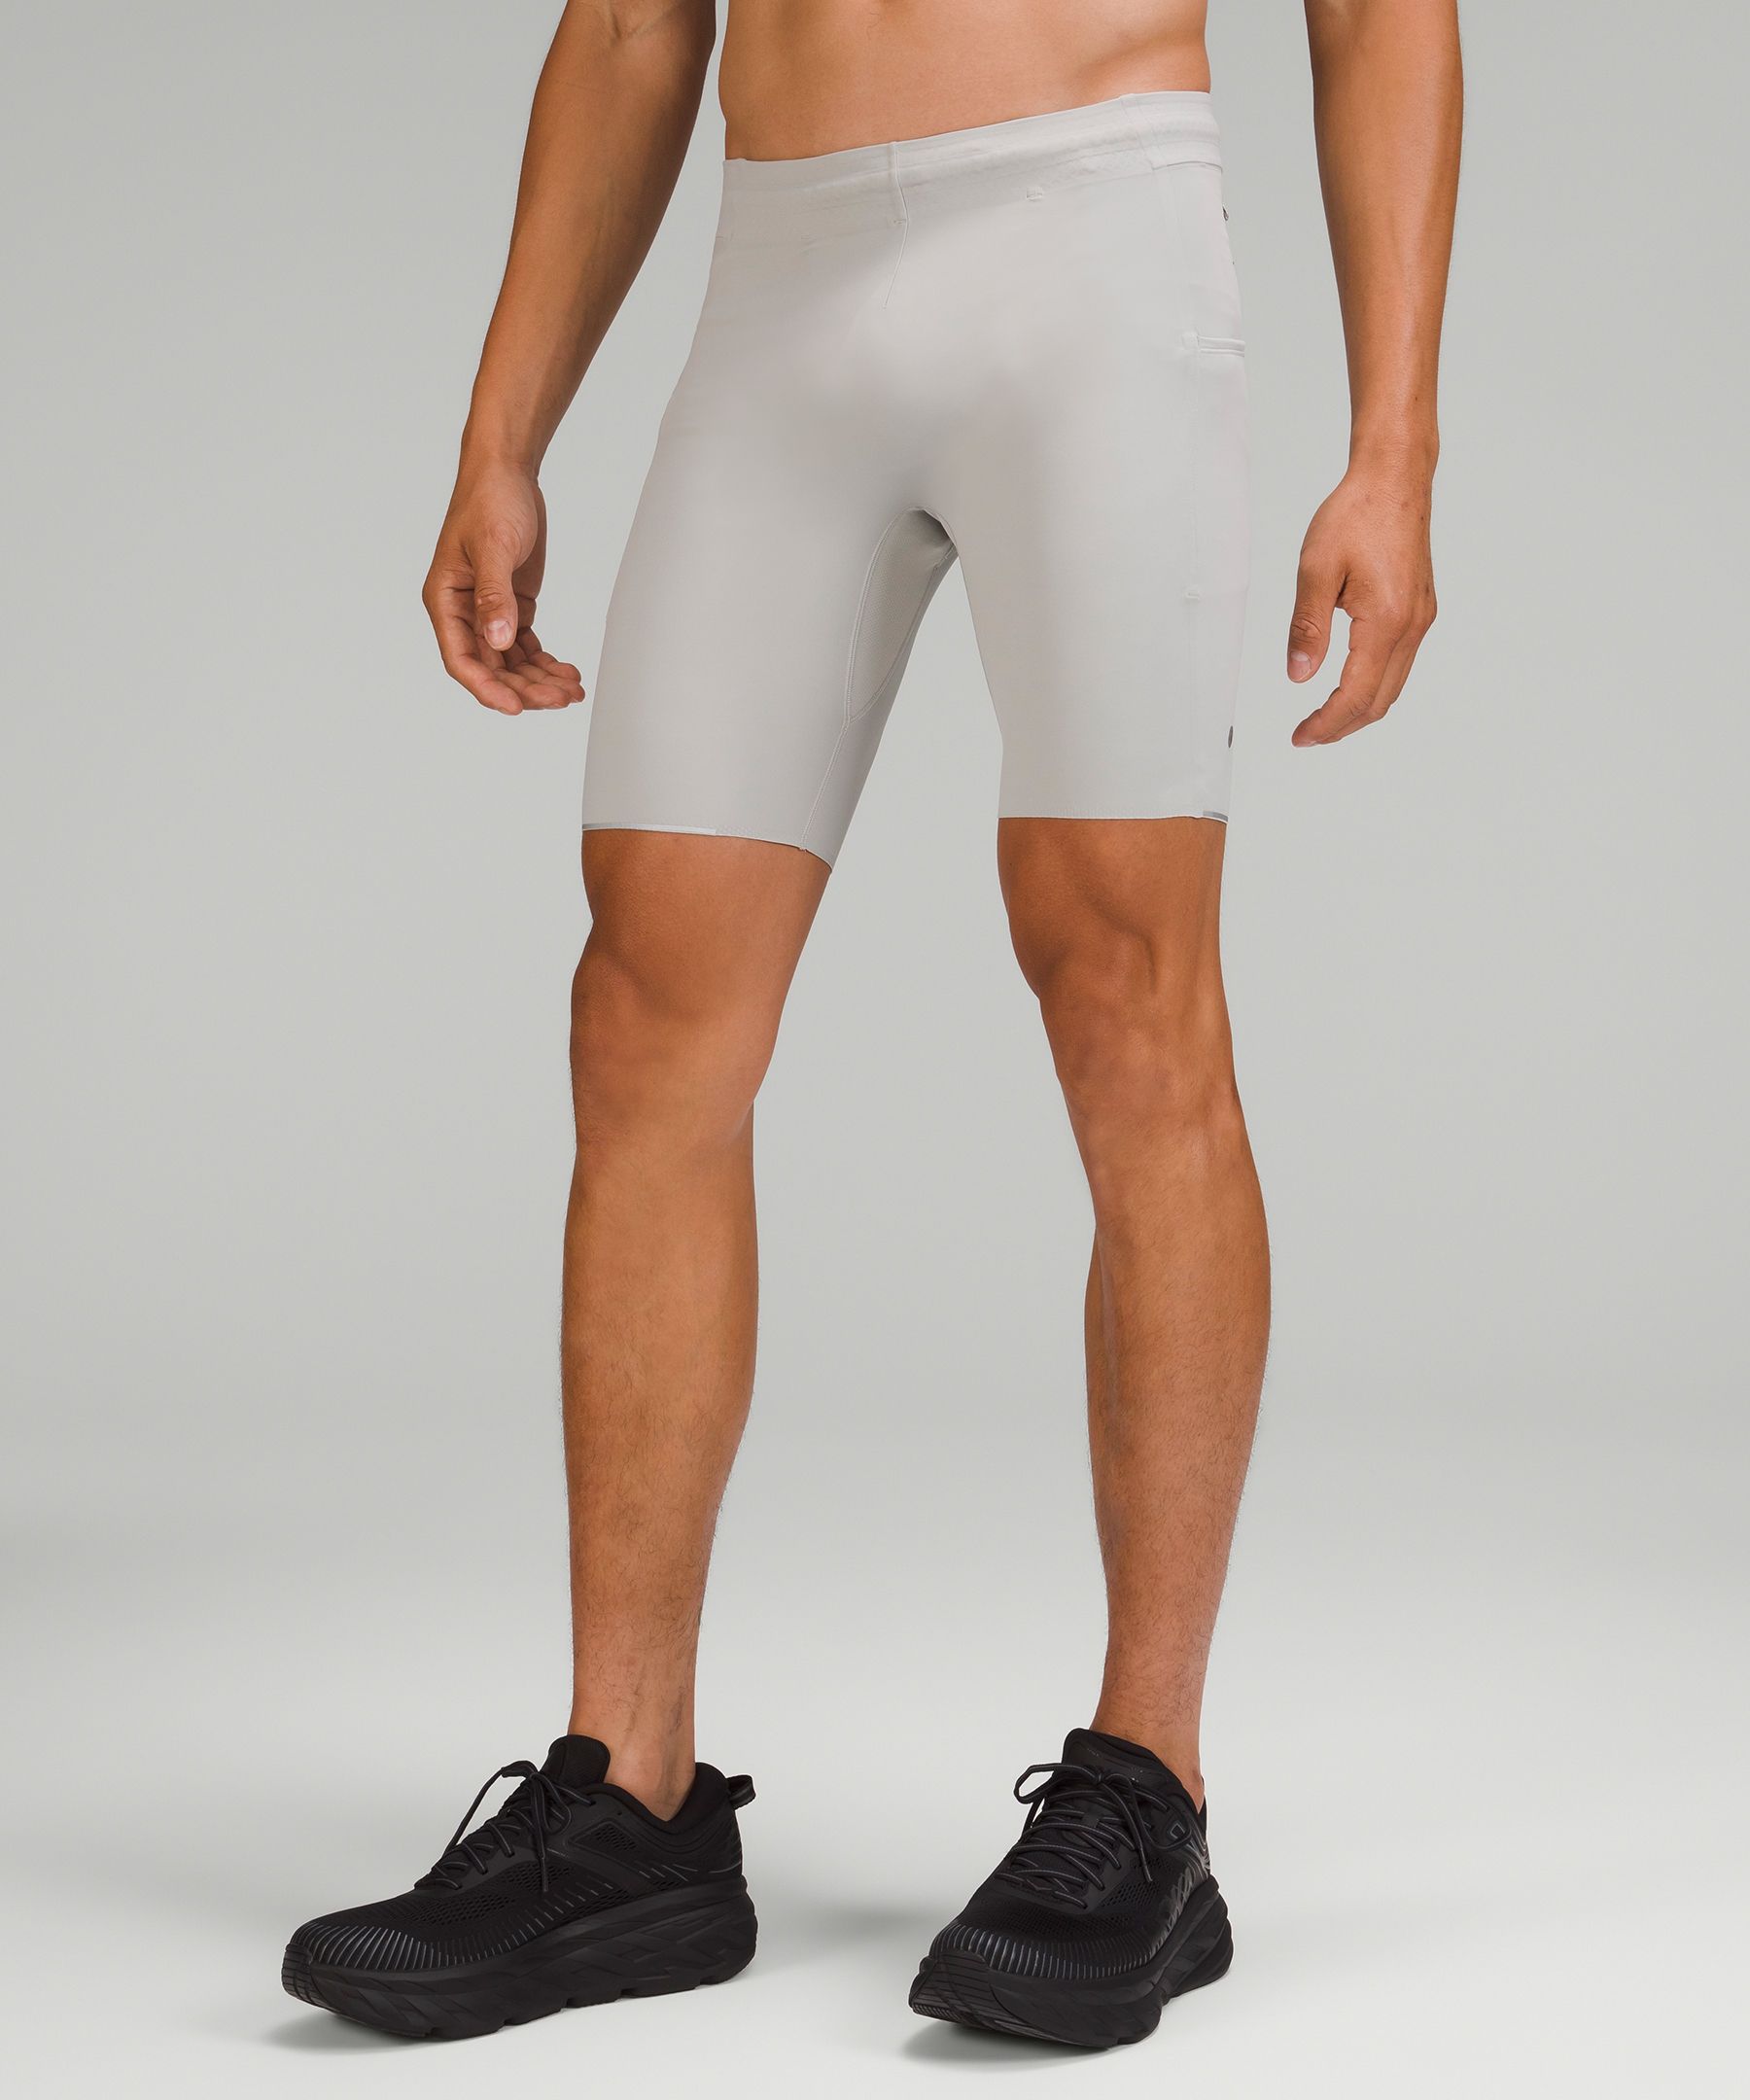 The best compression gear on the planet. Period. – WOLACO